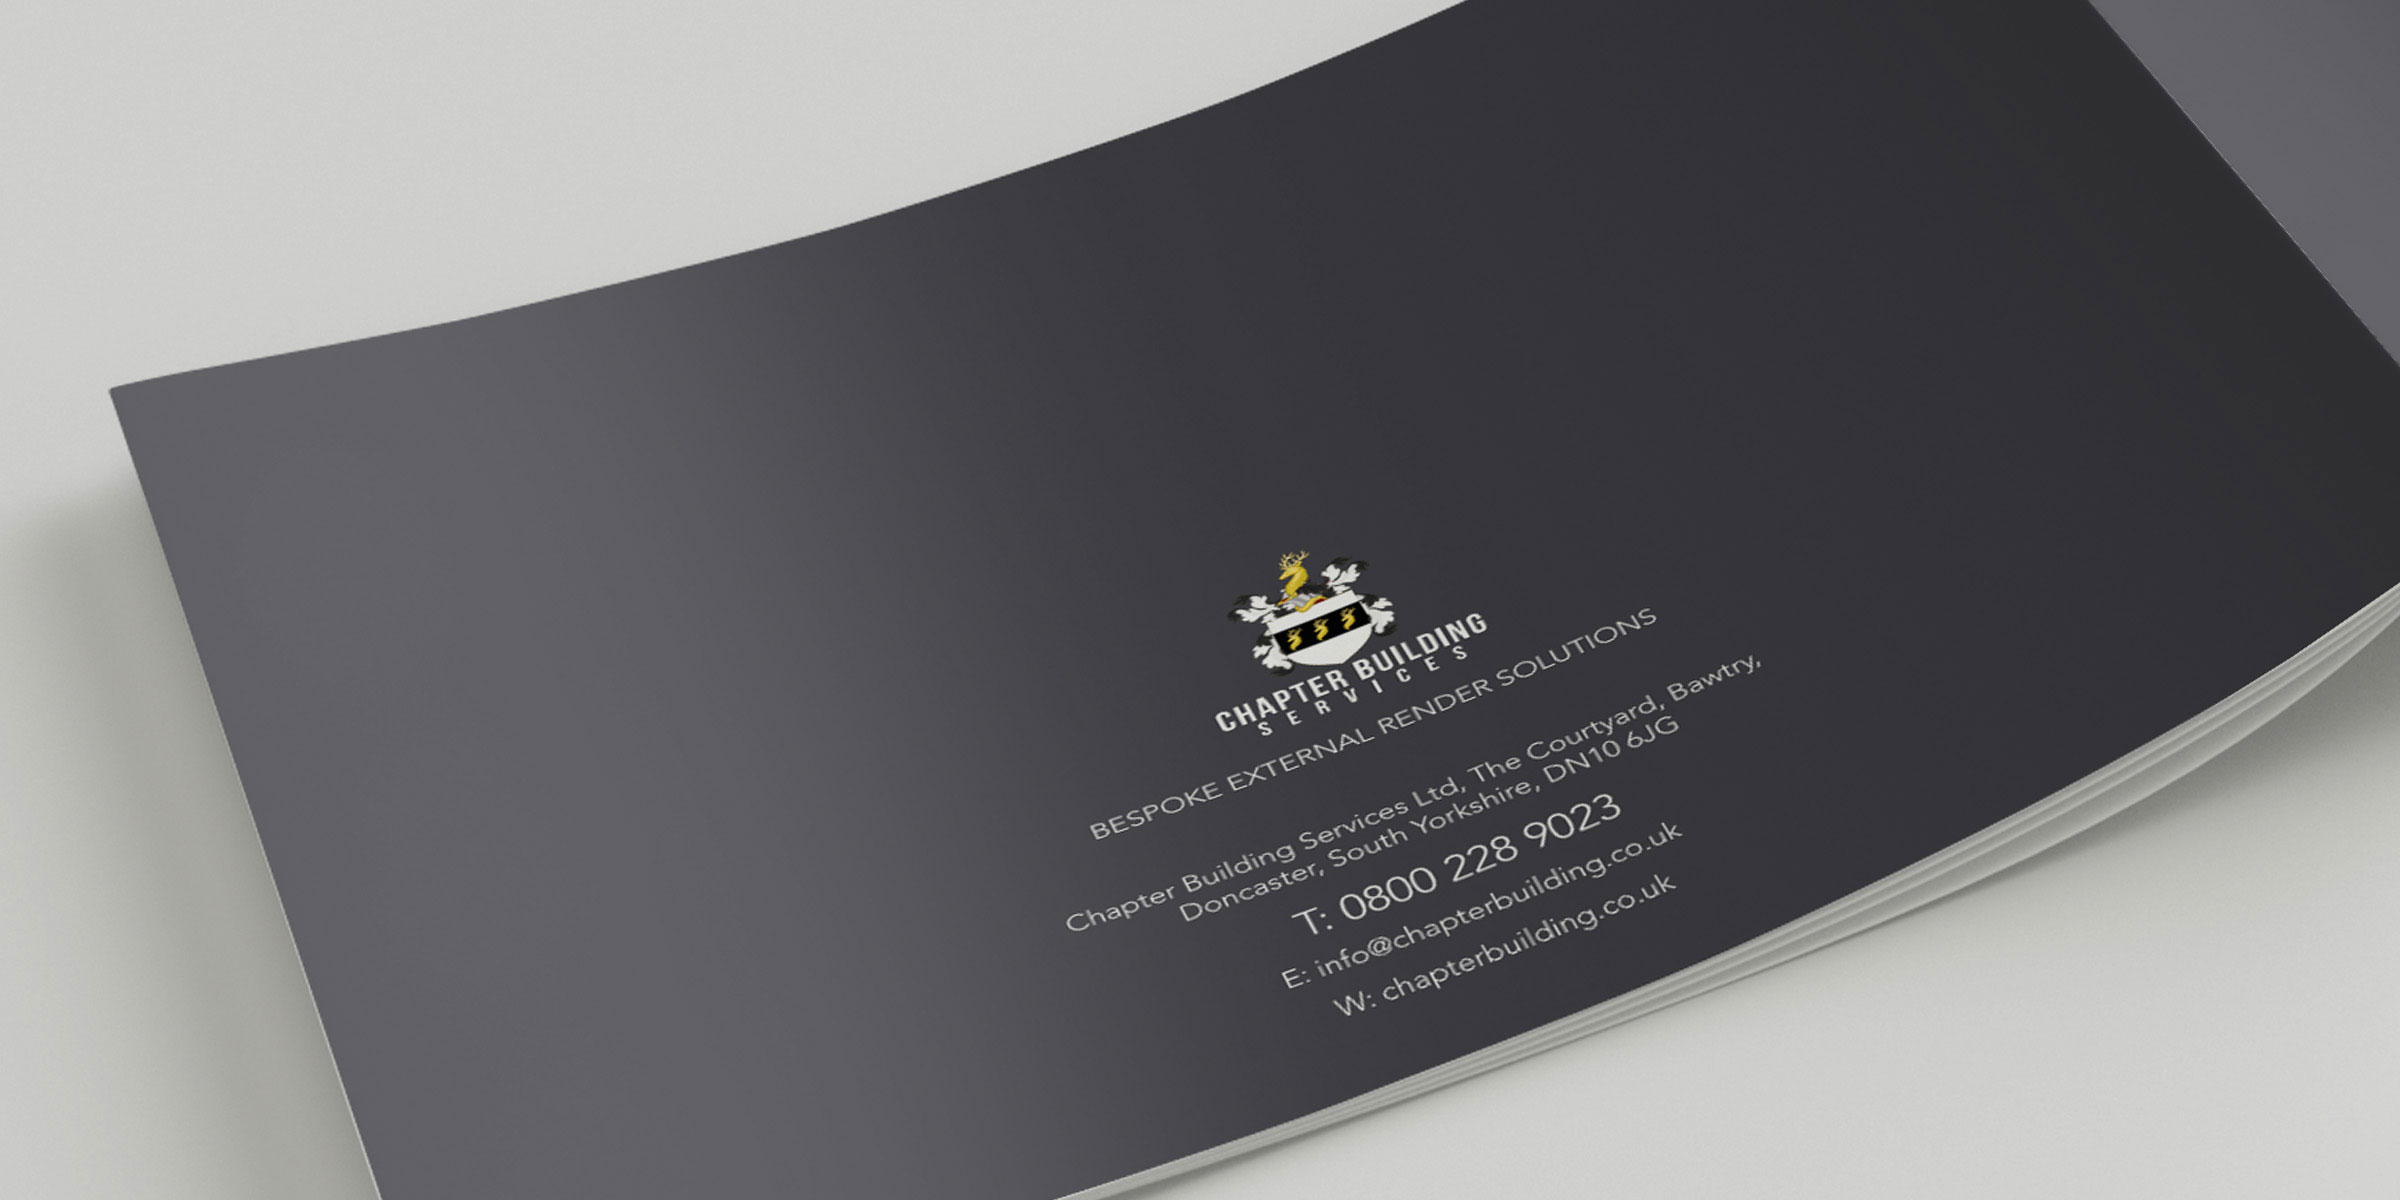 Chapter Wealth Building Services Corporate Brochure Design - Rear Cover